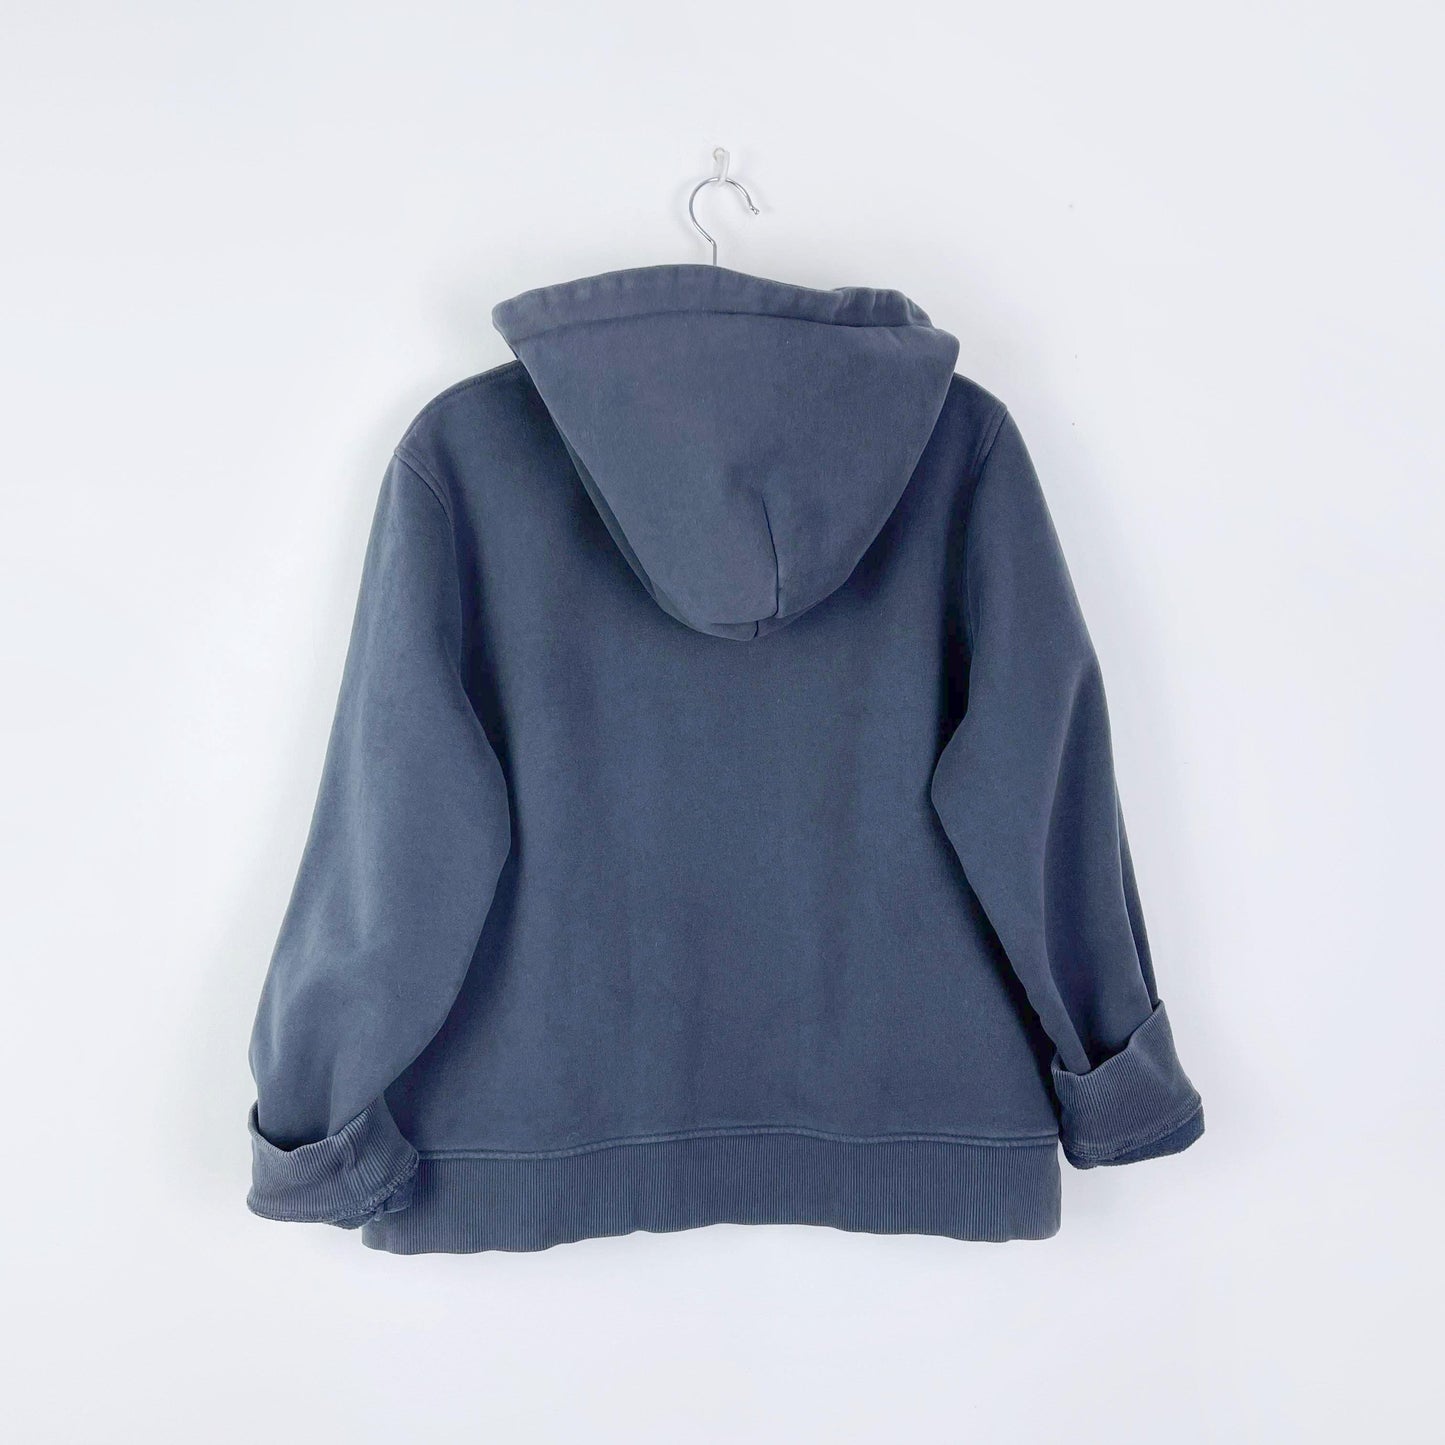 roots cloud 1/2 zip hoodie - size small